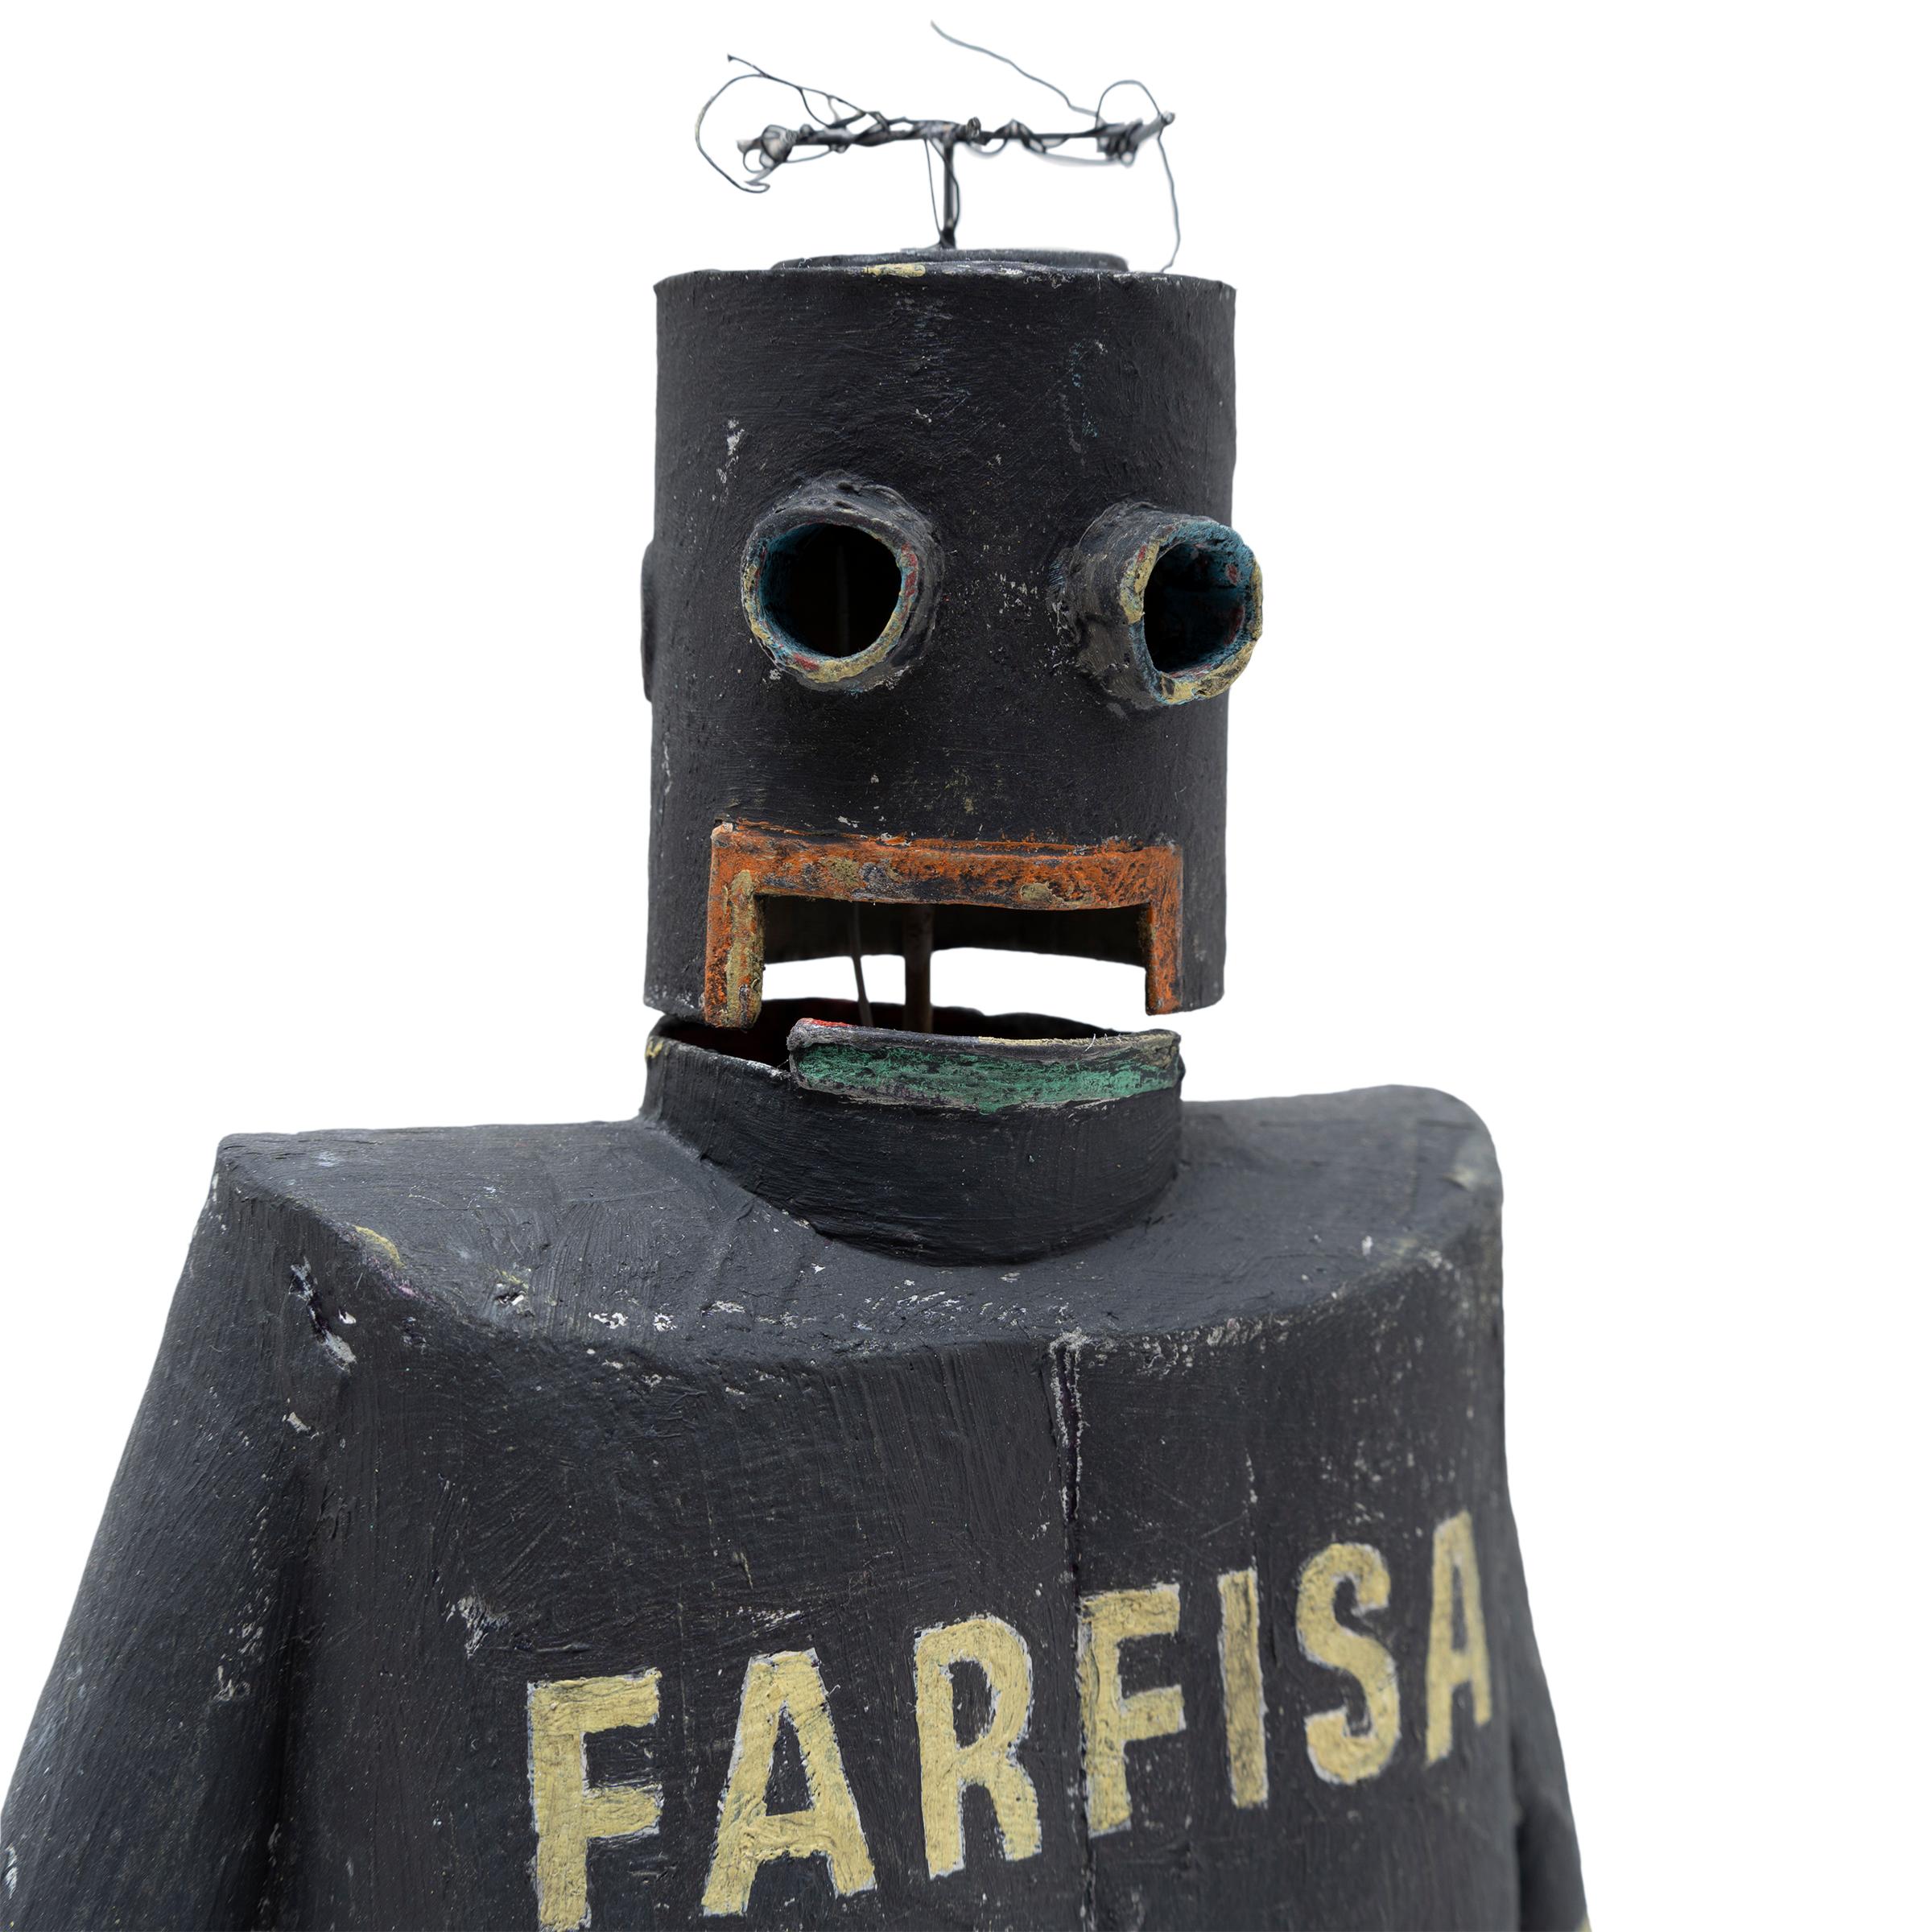 To Chicago-based artist Patrick Fitzgerald, his sculptures are a means of traveling through time. Working from found materials, Fitzgerald constructs miniature soap box cars and the branded attire of their imagined drivers. Futuristic forms imbued